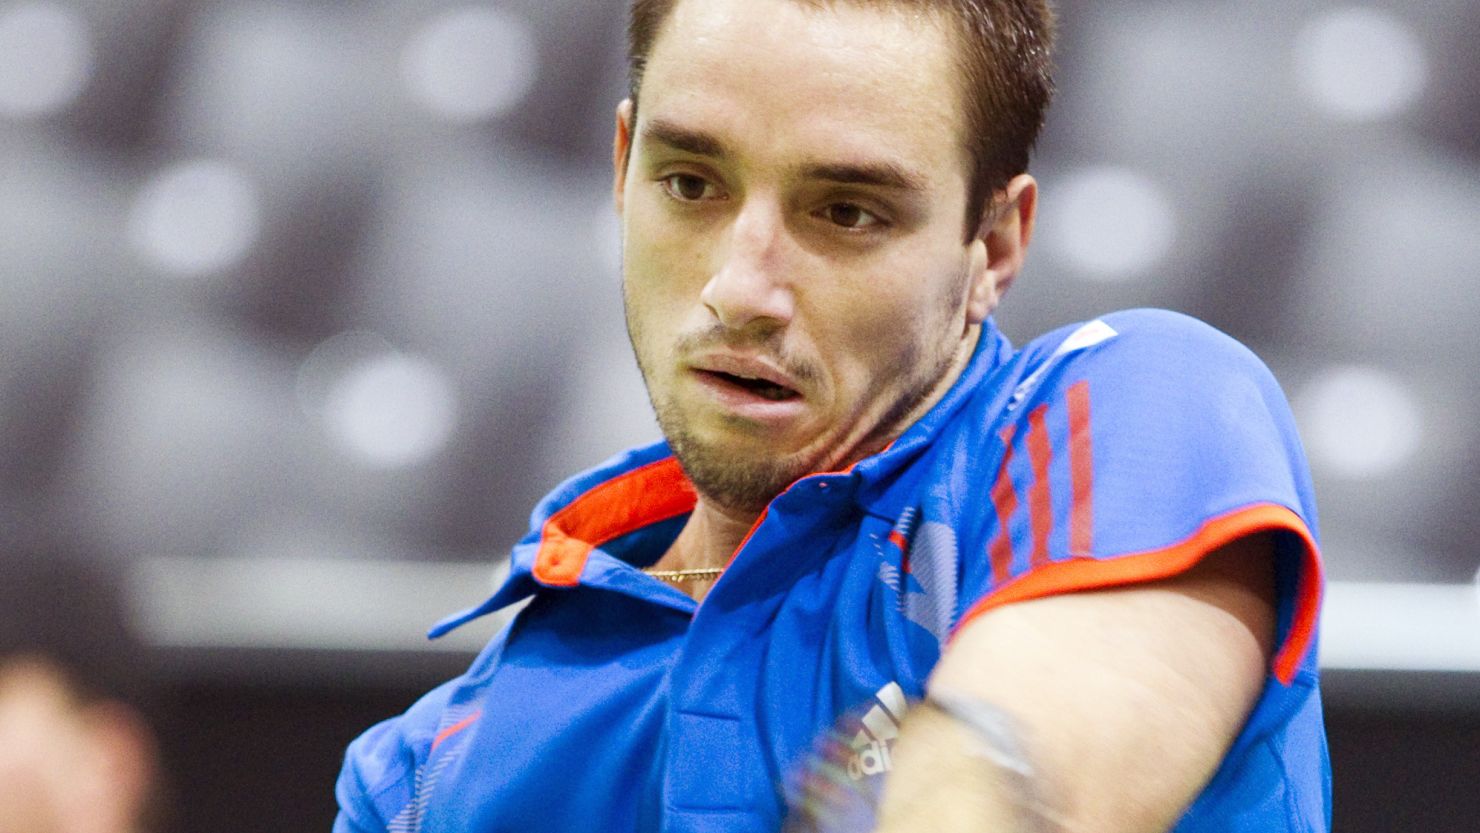 Serbia's Viktor Troicki in action at the ATP tour event in Rotterdam on Tuesday